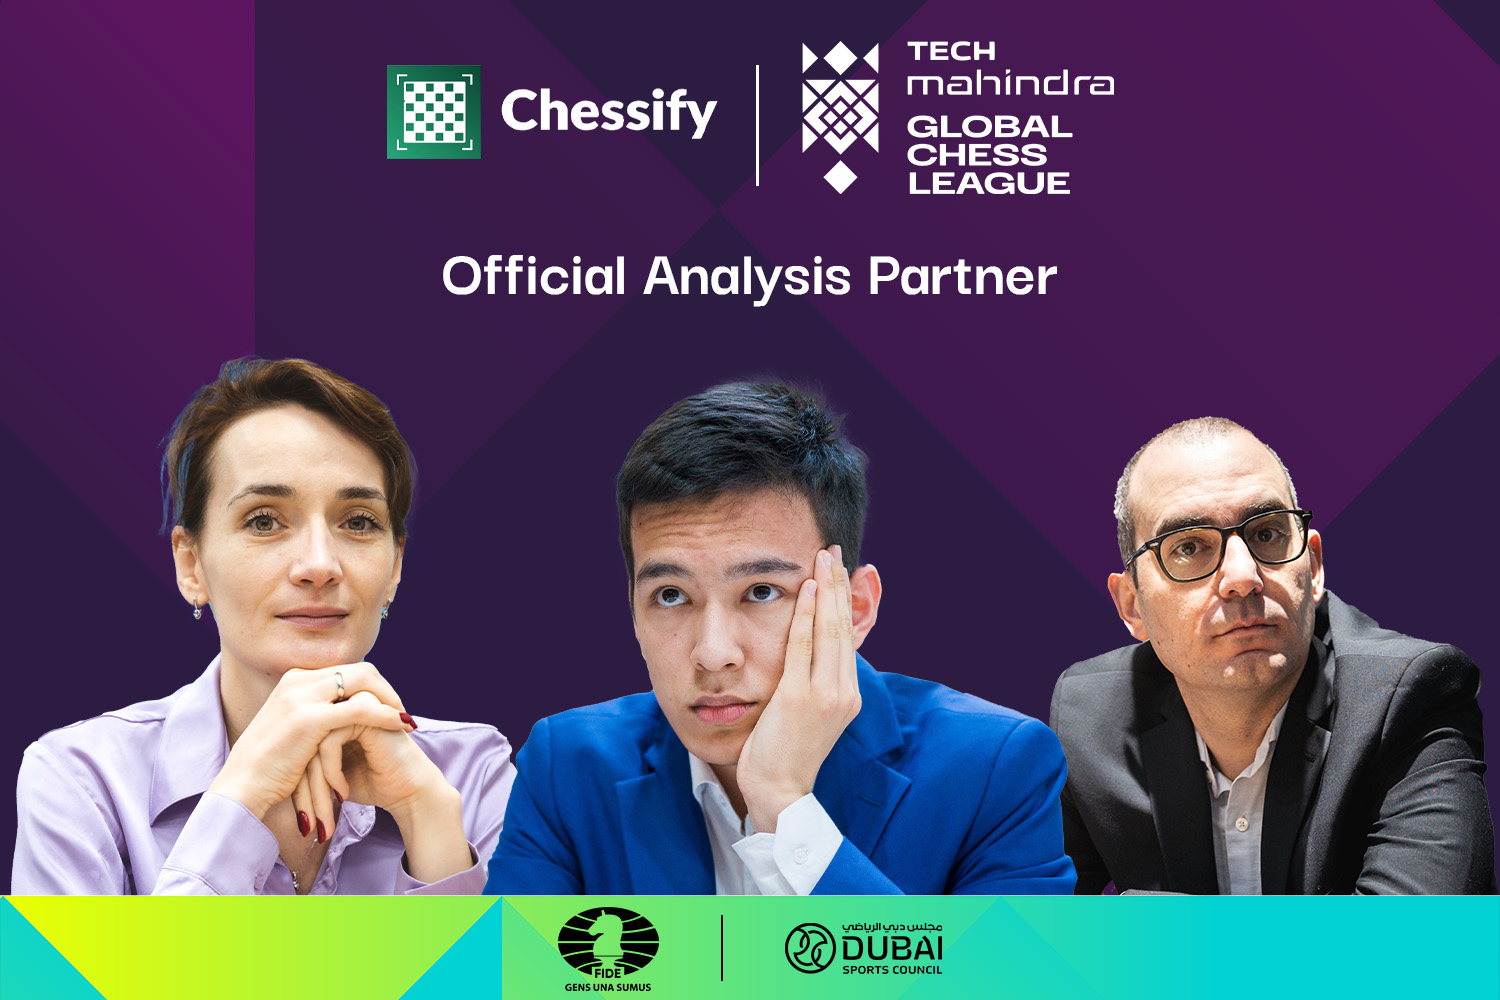 Chessify and GCL Partnership